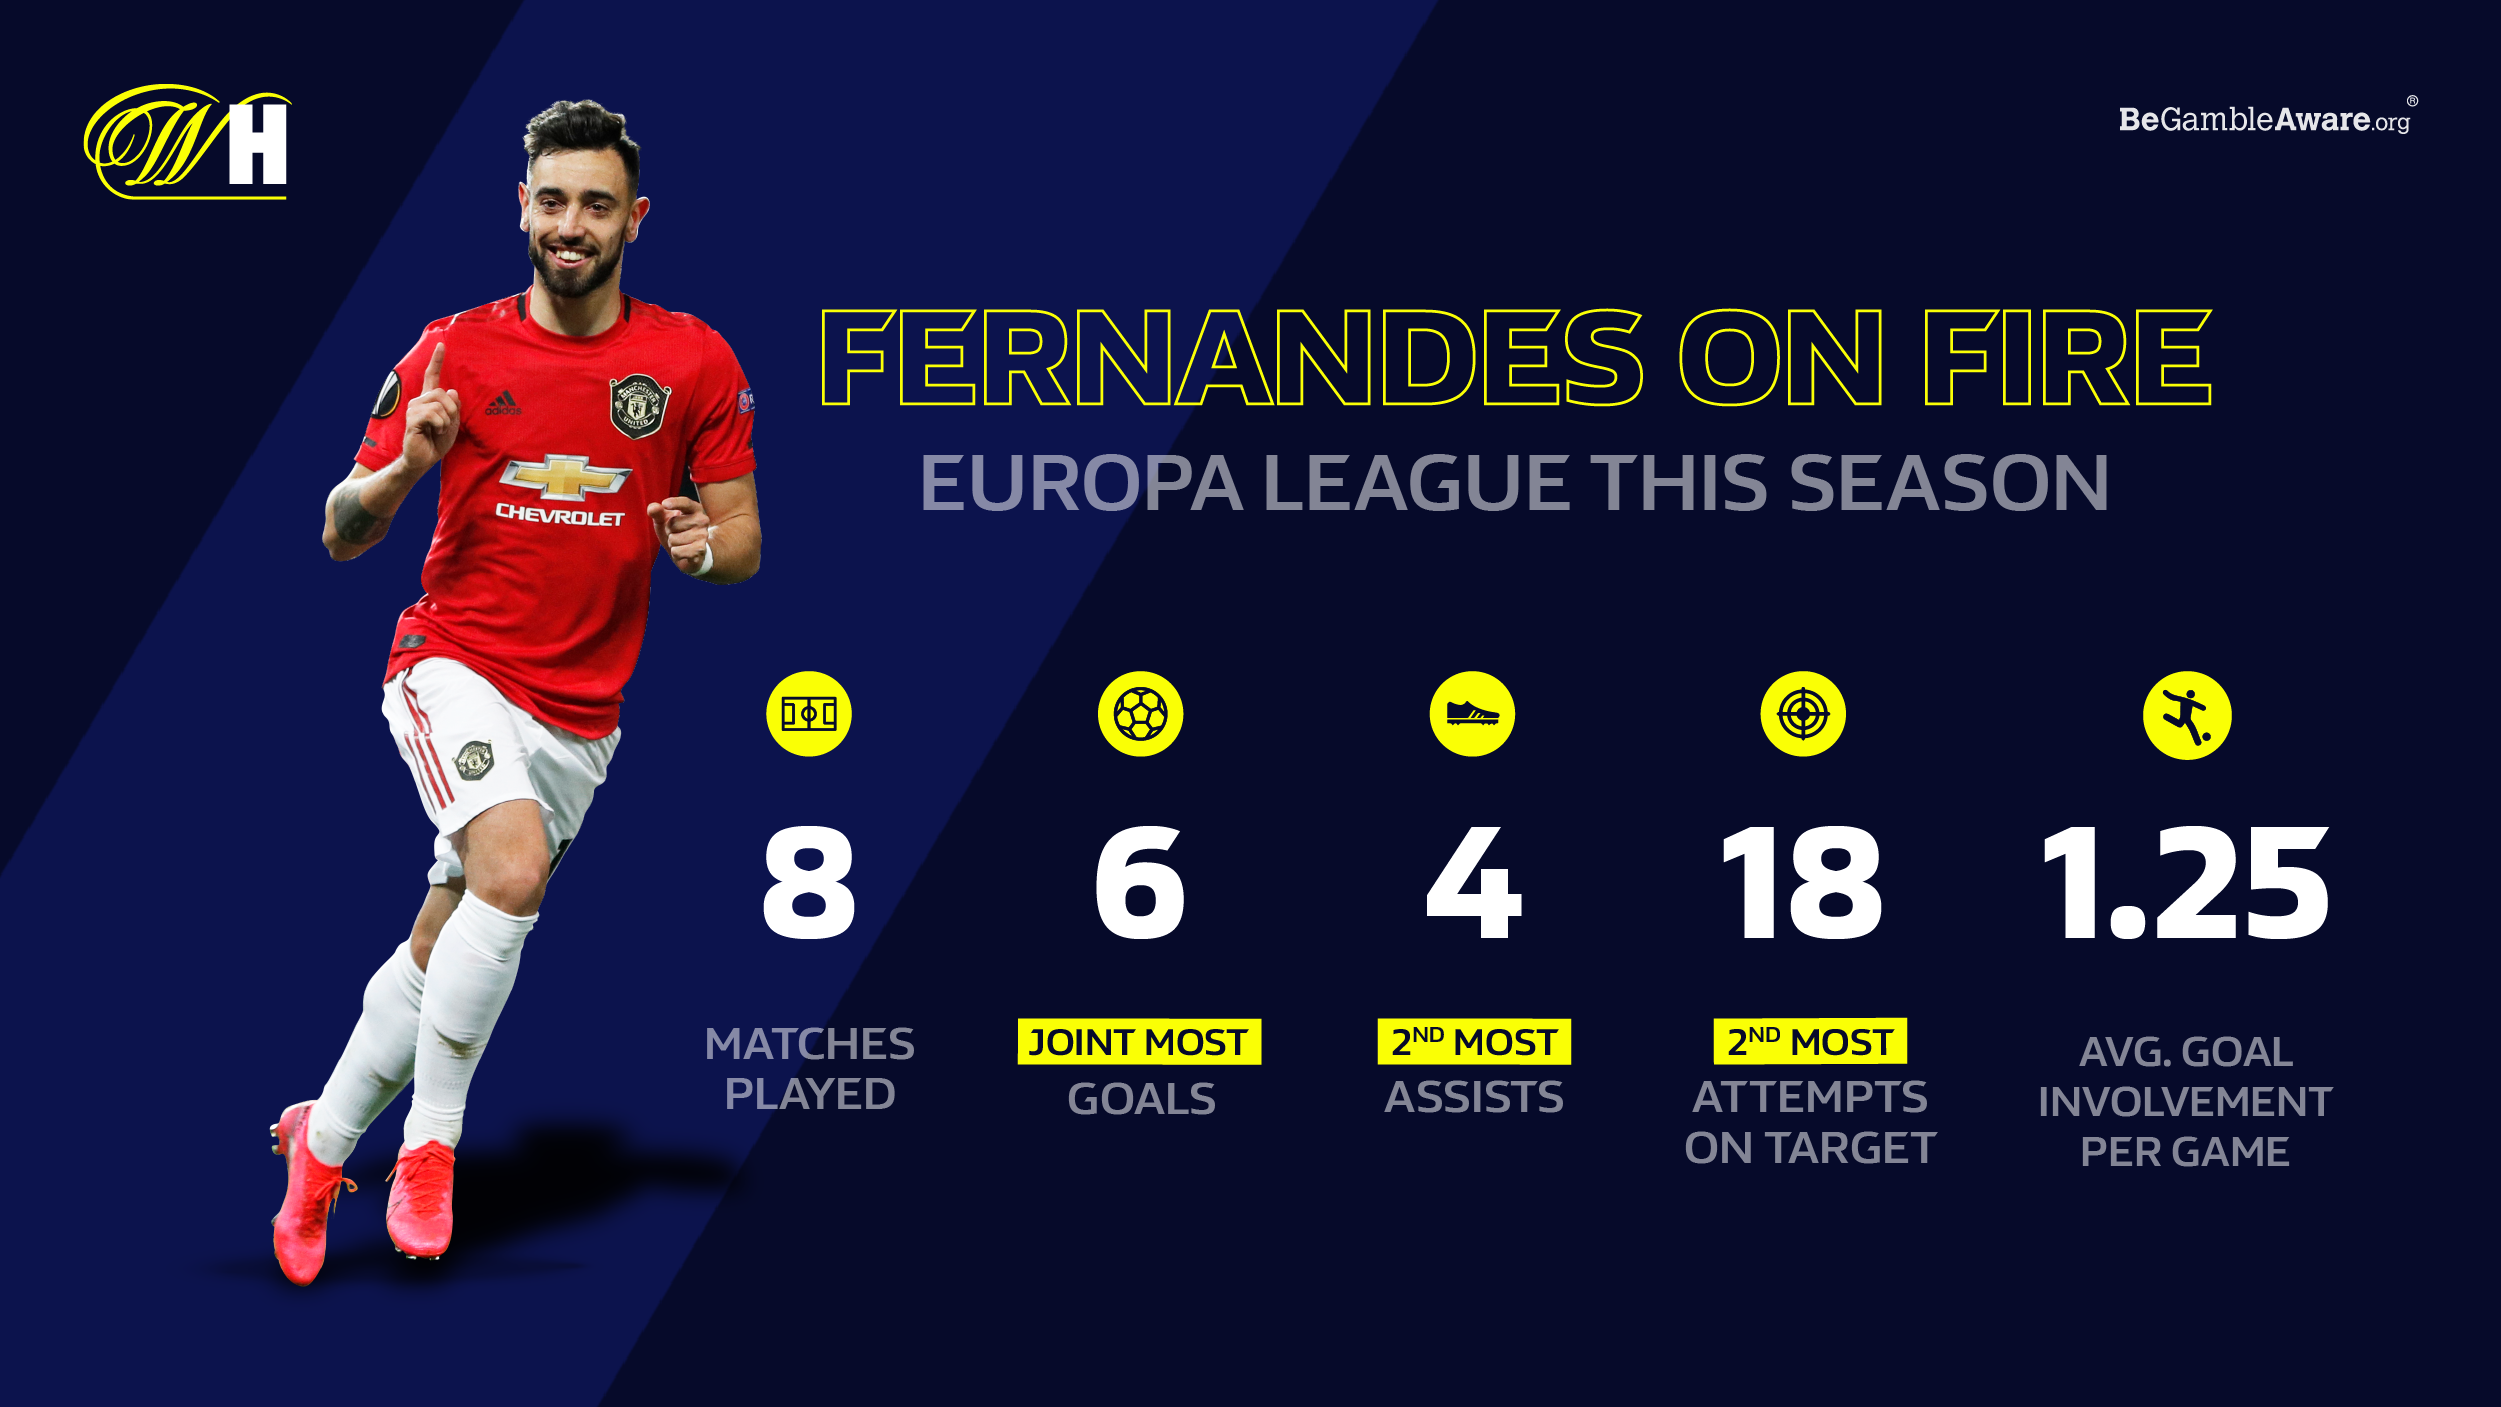 William Hill on Twitter: "🥇 Joint goals 🥈 2nd most assists 🔥 Bruno is enjoying his time in this season's Europa League competition. https://t.co/ZtzgJrqra9" / Twitter